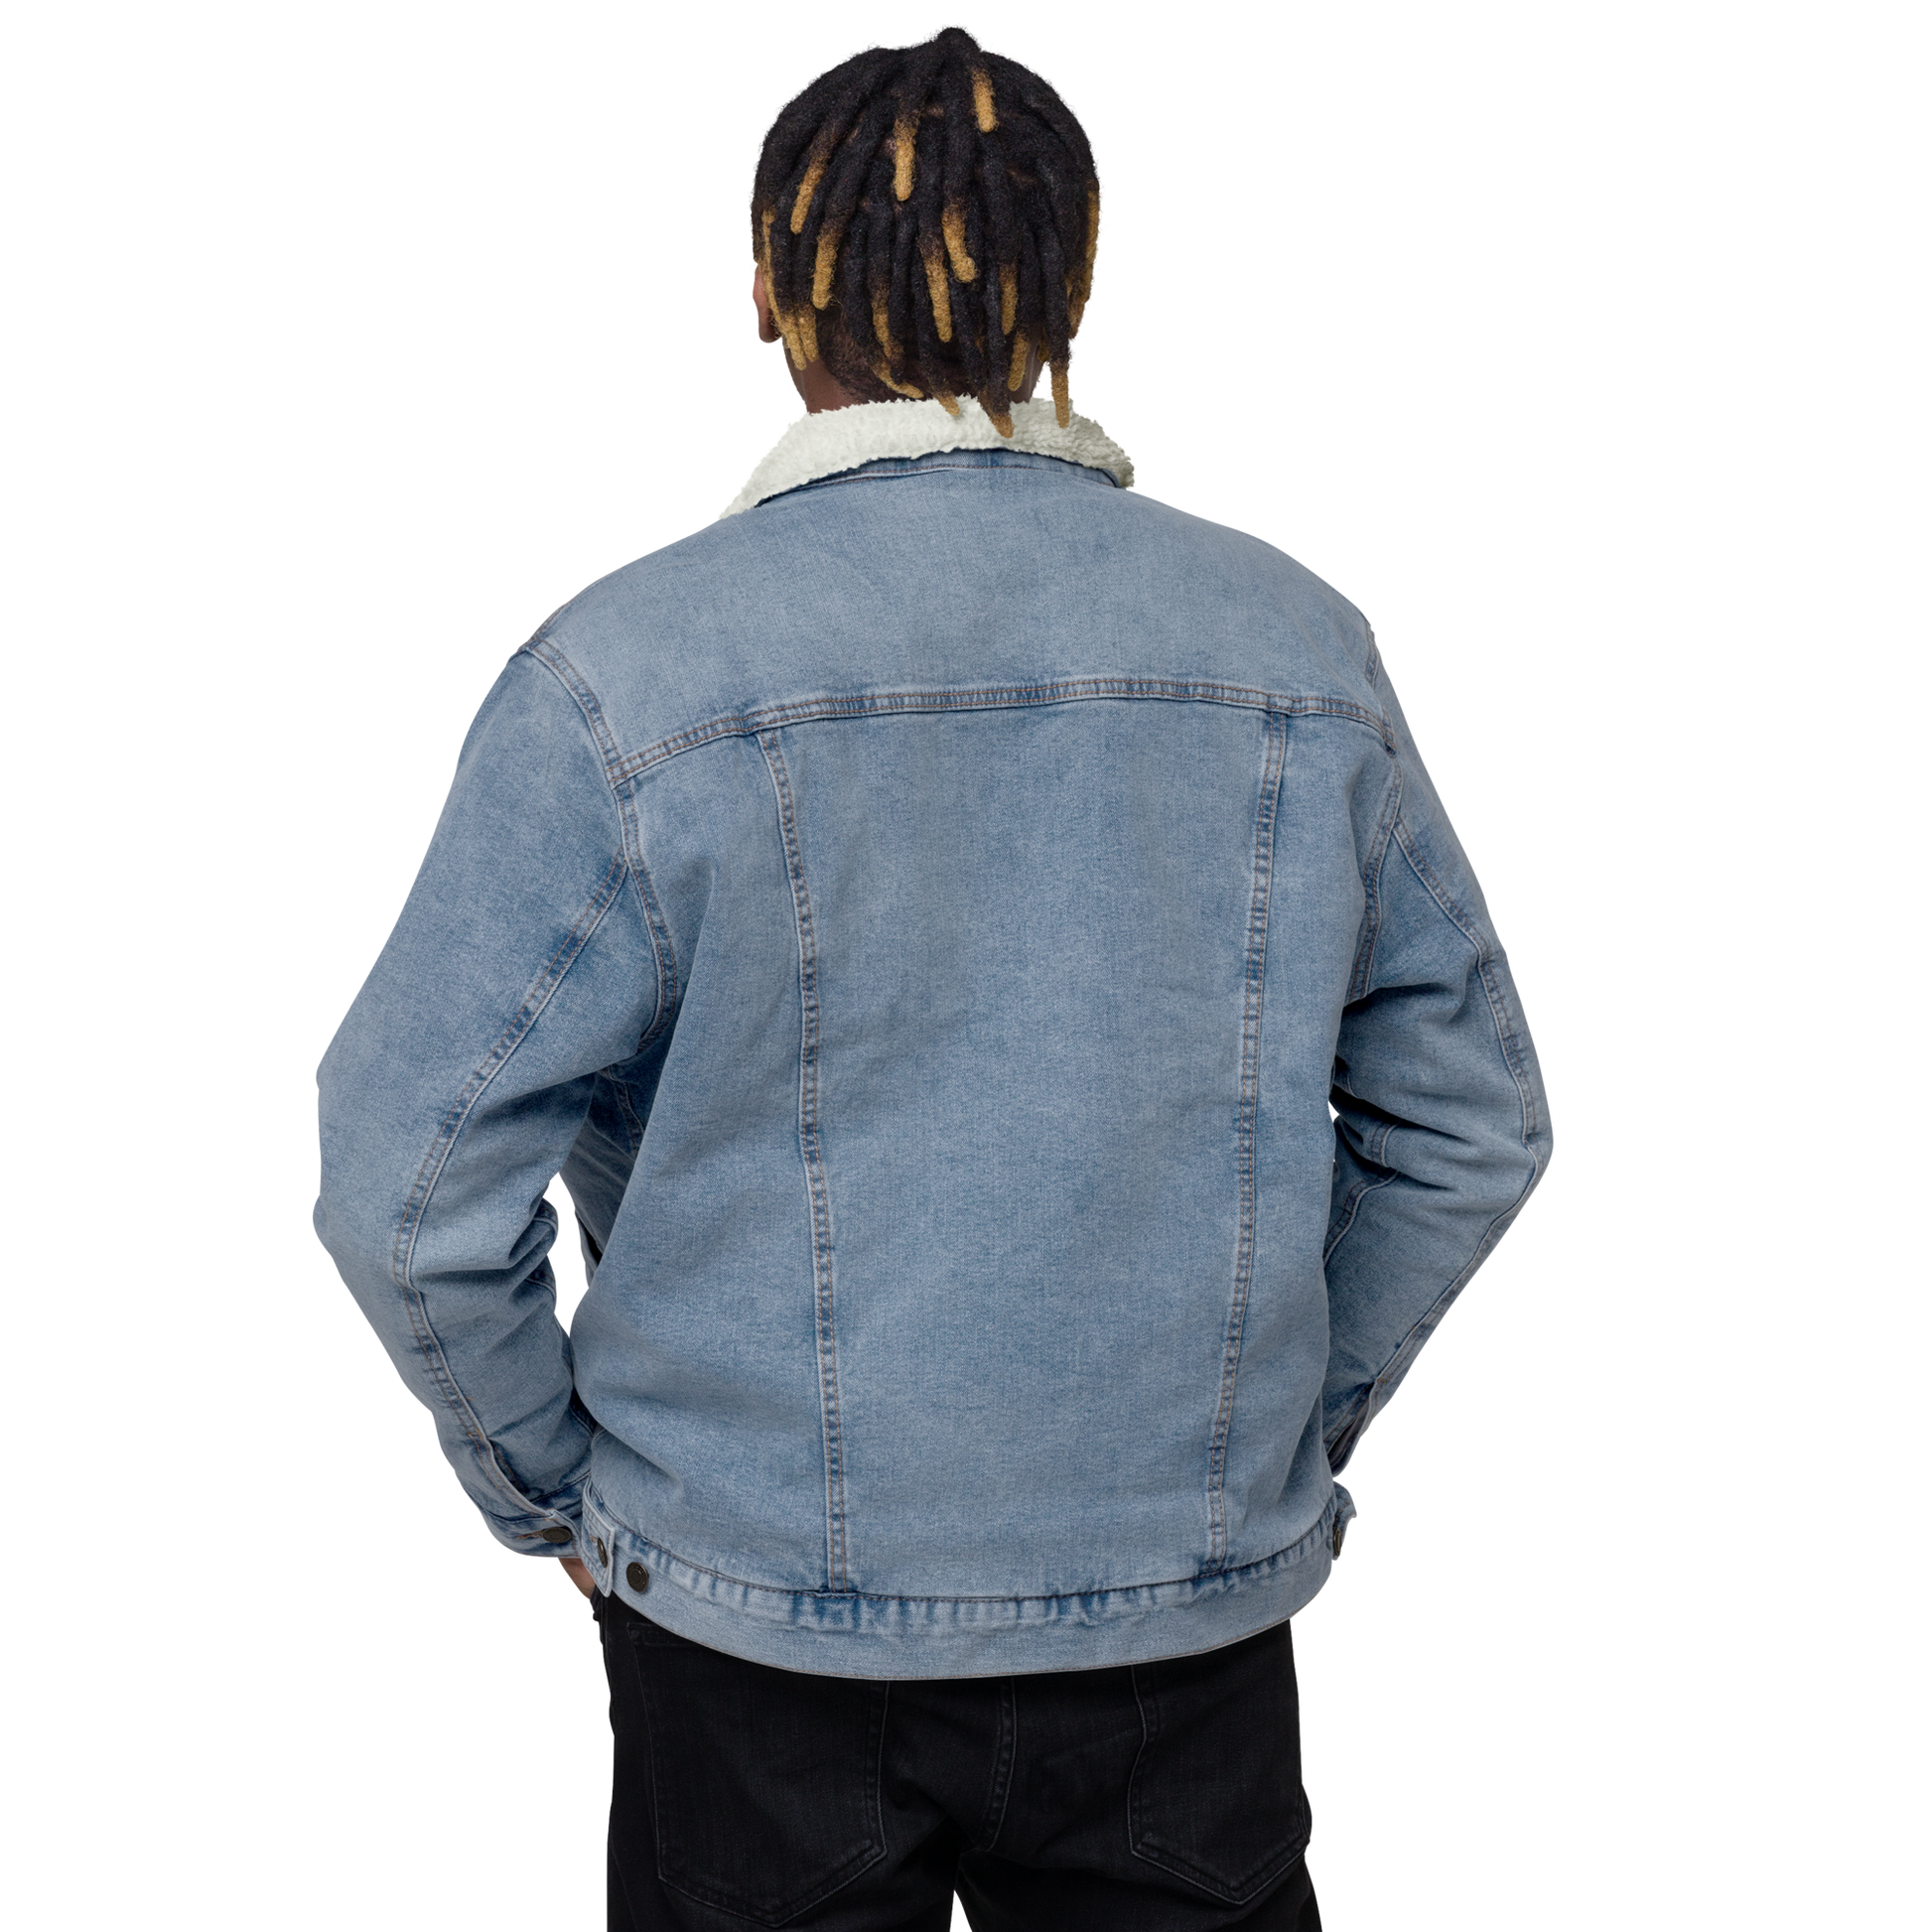 YHM Designs - YVR Vancouver Denim Sherpa Jacket - Crossed-X Design with Airport Code and Vintage Propliner - Black & White Embroidery - Image 12